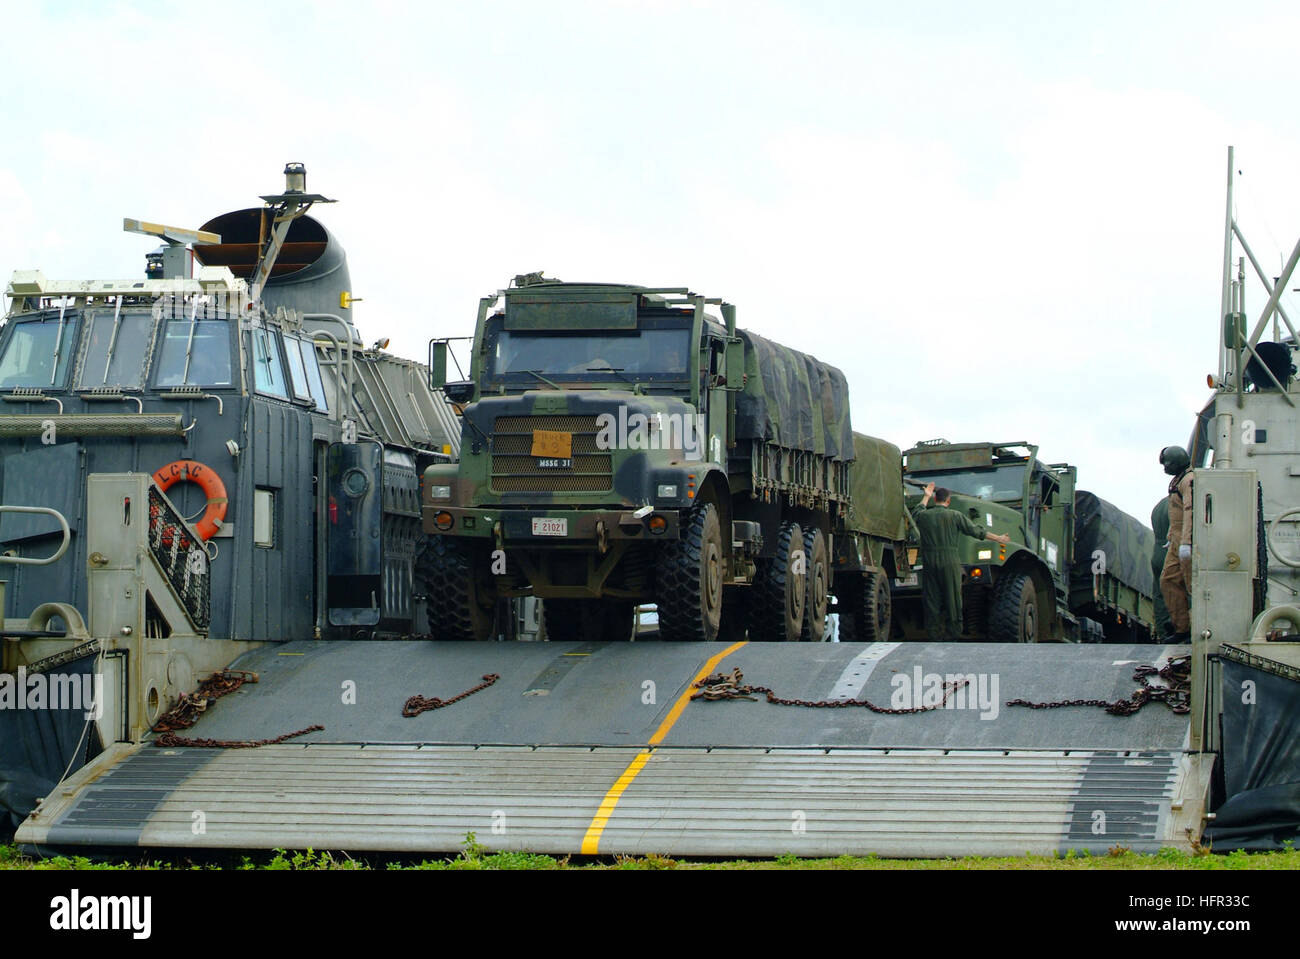 060303-N-4772B-028 Jolo, Philippines (March 3, 2006) Ð Marines assigned to the 31st Marine Service Support Group (MSSG) load equipment on a Landing Craft, Air Cushion (LCAC) on the island of Jolo, before heading out toward the amphibious dock landing ship USS Harpers Ferry (LSD 49). The joint efforts of more than 500 AFP and U.S. medical, dental, engineer and protection personnel were able to bring medical and dental support to more than 11,000 Filipino people and 504 animals, along with building four elementary schools. Harpers Ferry and Elements of the 31st Marine Expeditionary Unit (MEU) ar Stock Photo